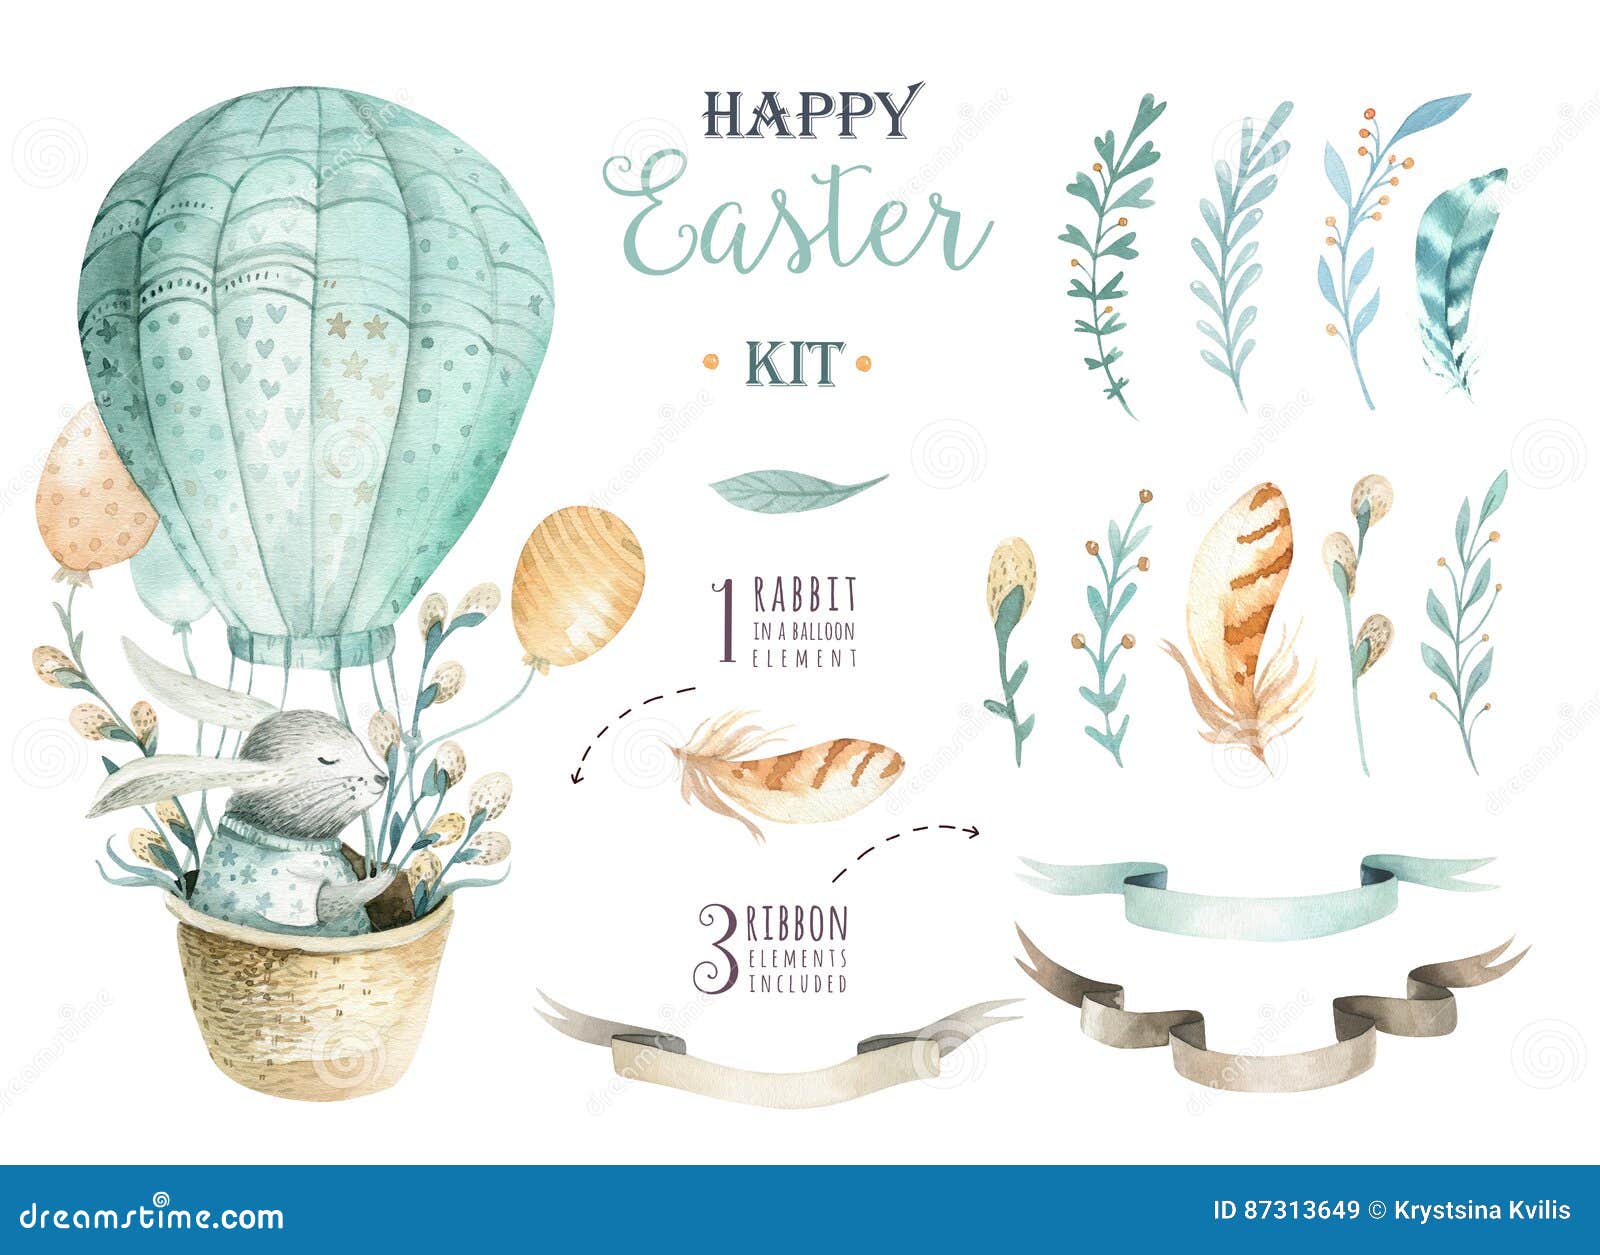 hand drawn watercolor happy easter set with bunnies .rabb